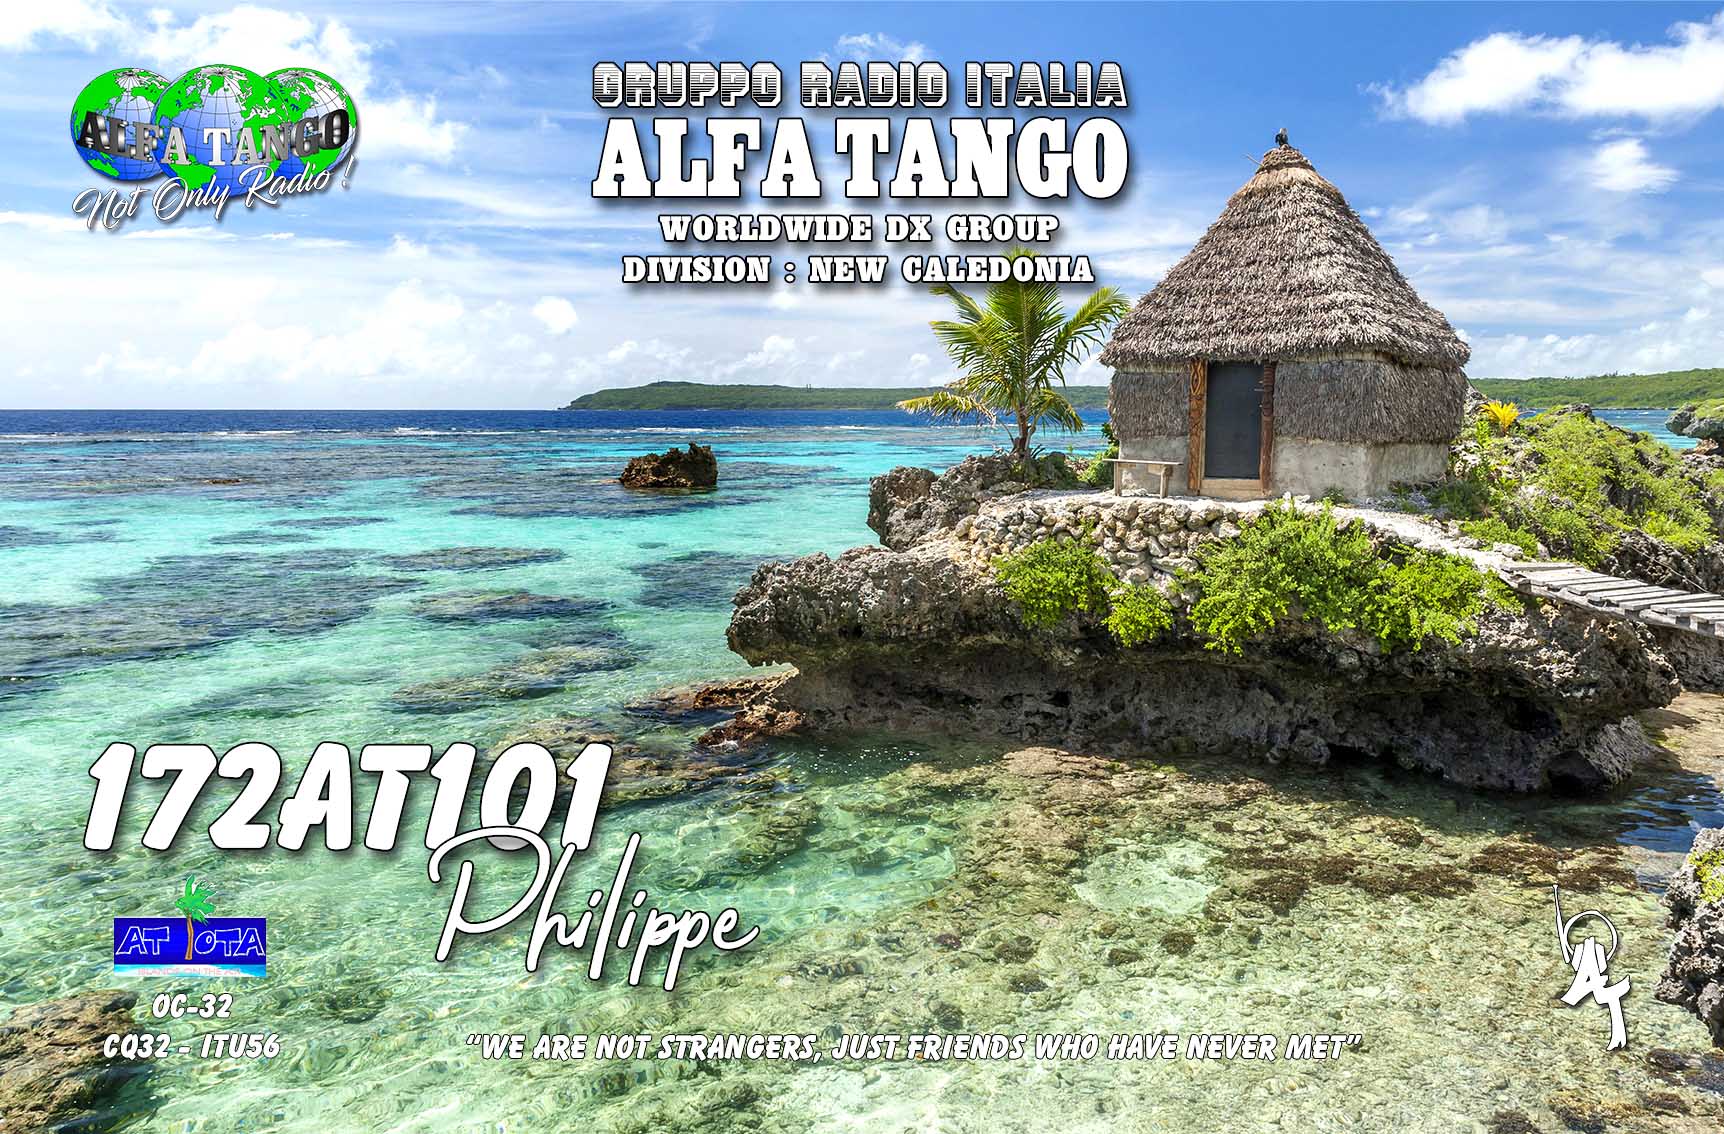 QSL_172AT101_Philippe_Special_light.jpg